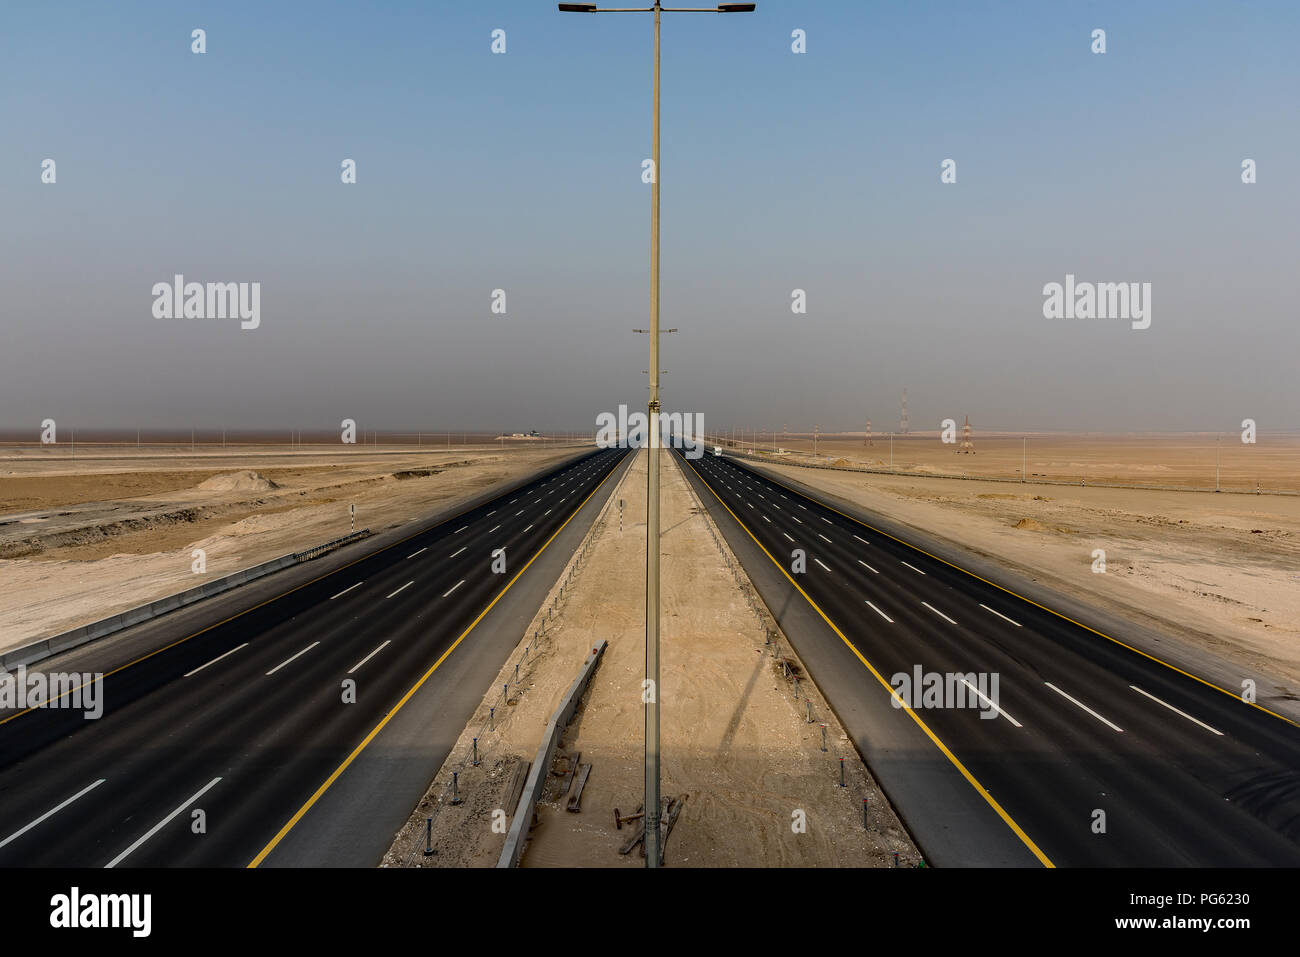 Mafraq-Ghweifat International Highway, United Arab Emirates.The speed limit is 160 km's/hr on a clean, smooth and flat 8-lane highway. Stock Photo